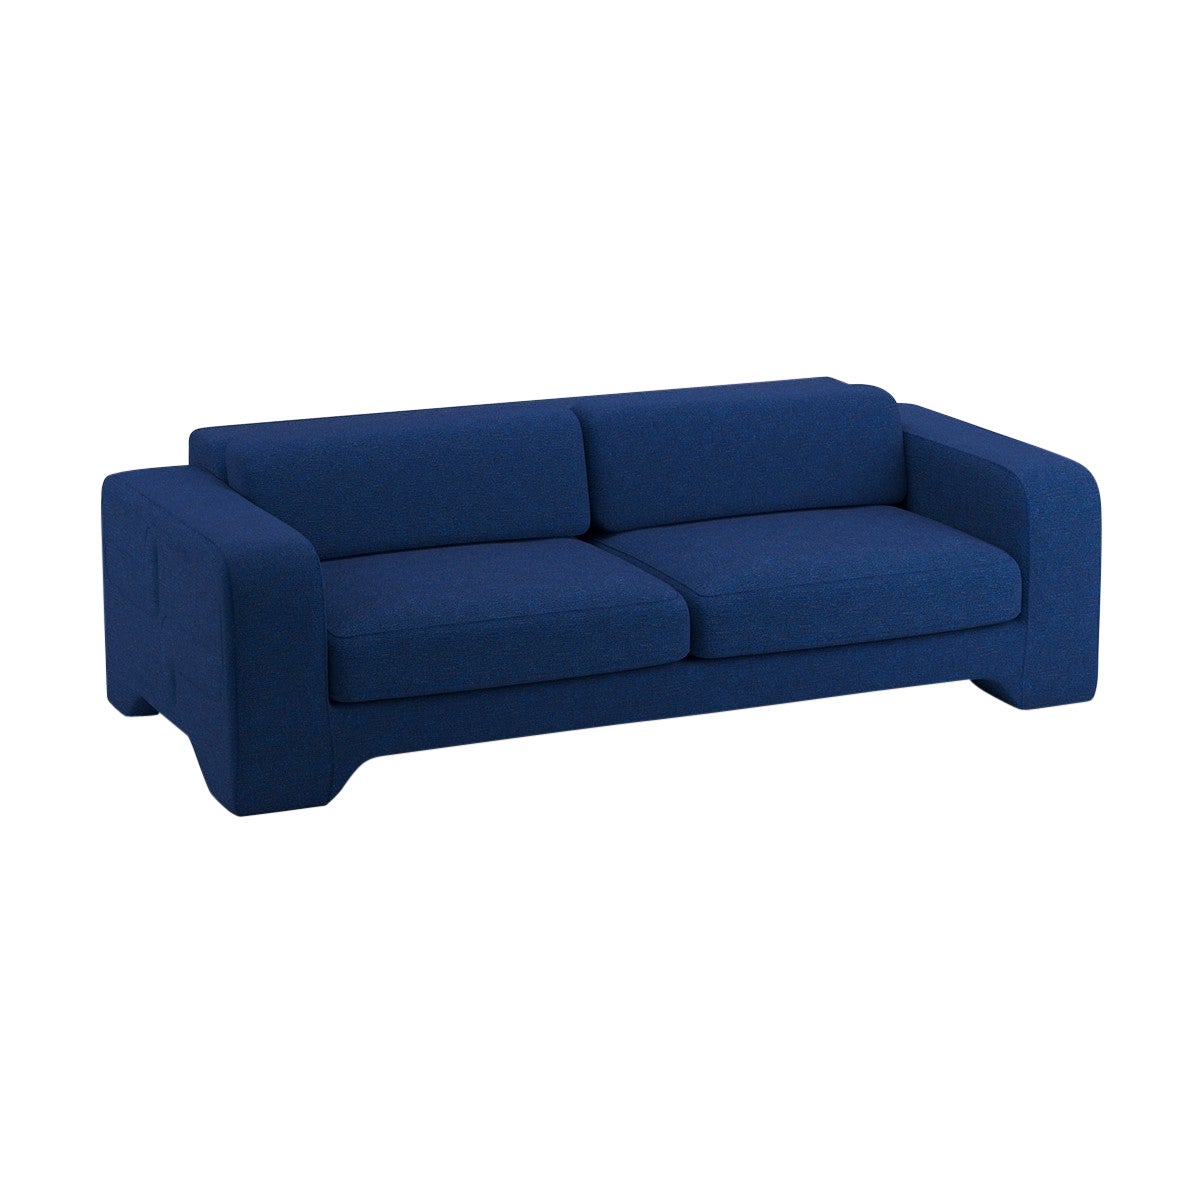 Popus Editions Giovanna 2.5 Seater Sofa in Ocean Megeve Fabric with Knit Effect For Sale